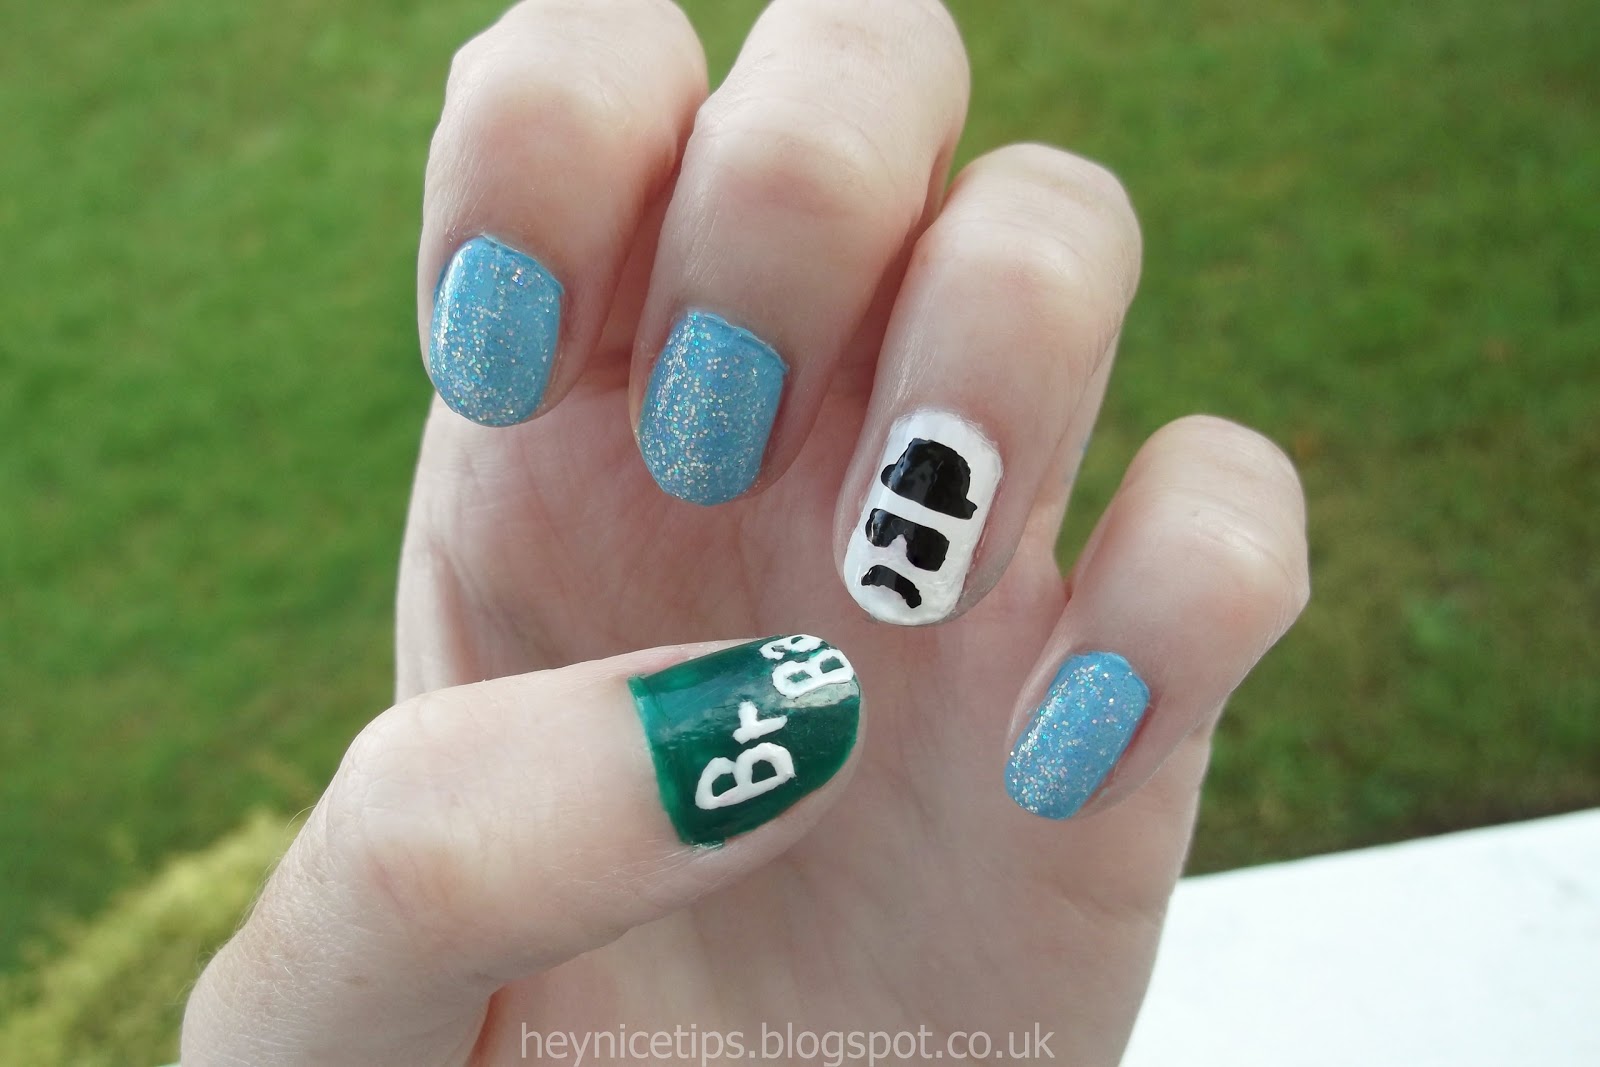 Bad Wolf Nail Art Designs - wide 5